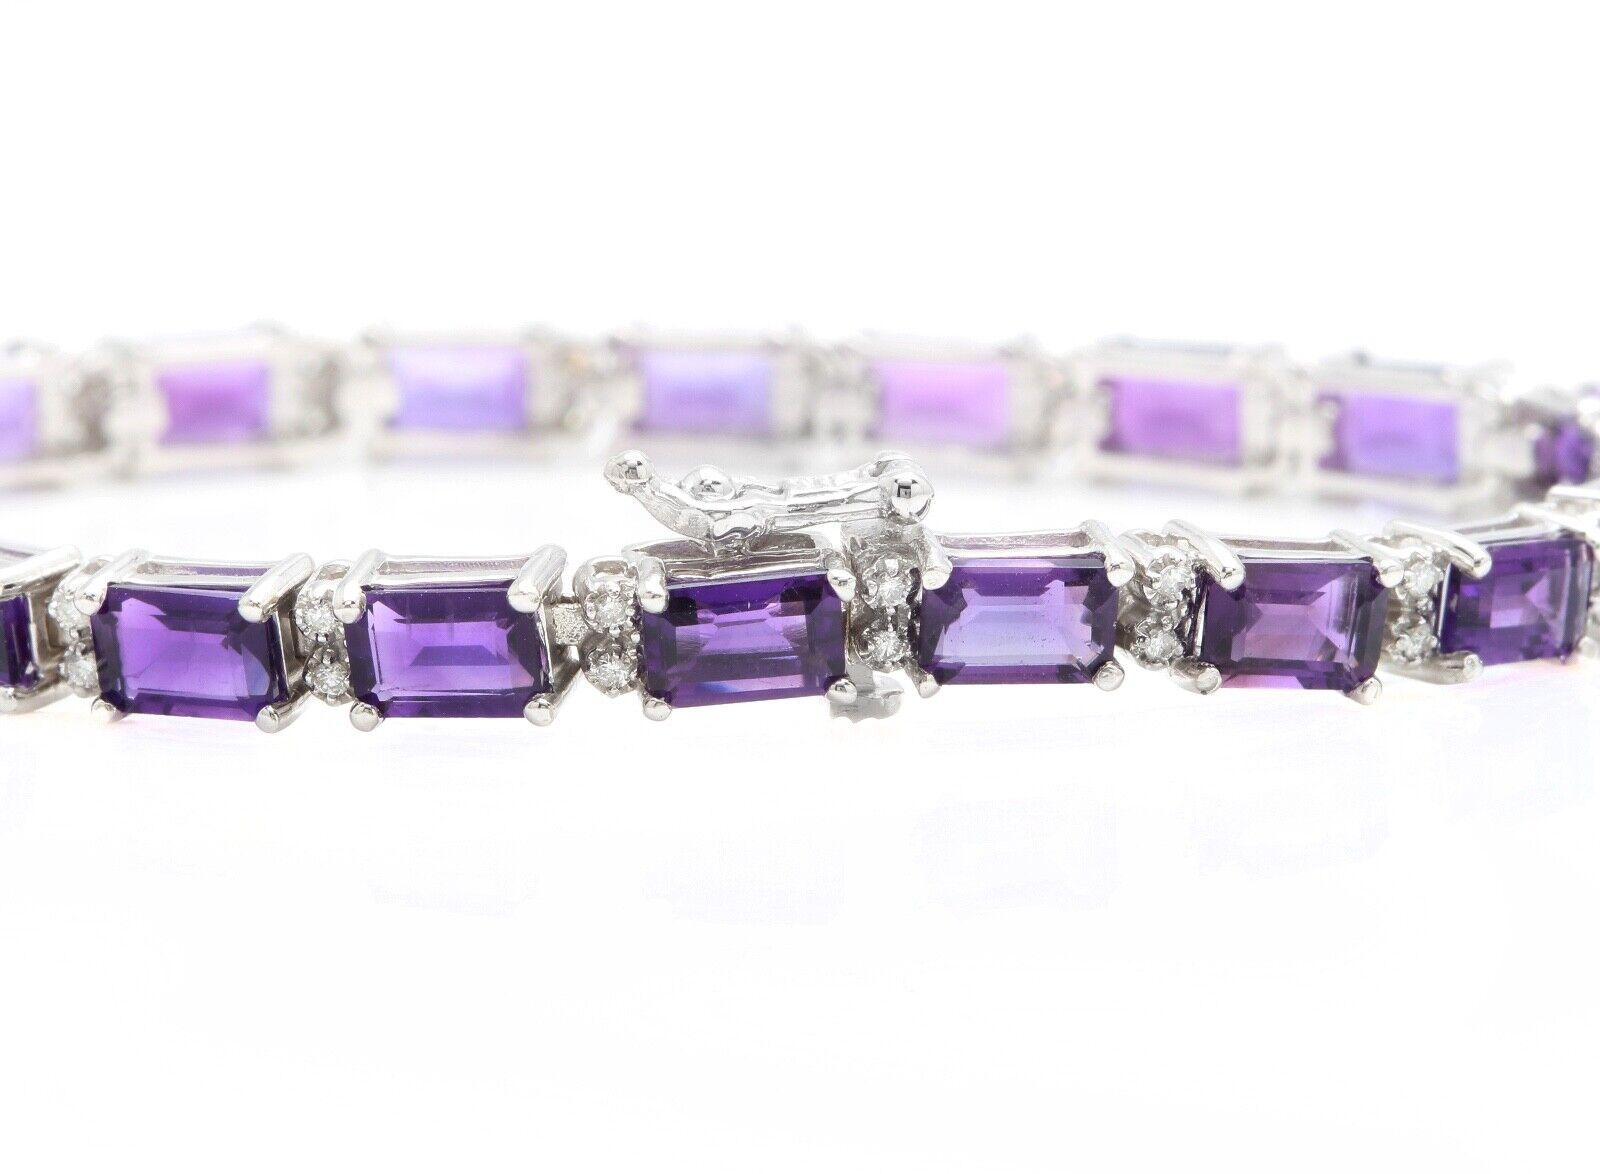 11.60 Carats Natural Amethyst & Diamond 14K Solid White Gold Bracelet 

Suggested Replacement Value: $7,000.00

STAMPED: 14K

Total Natural Round Diamonds Weight: Approx. 0.60 Carats (color G-H / Clarity SI)

Total Natural Amethyst Weight is: